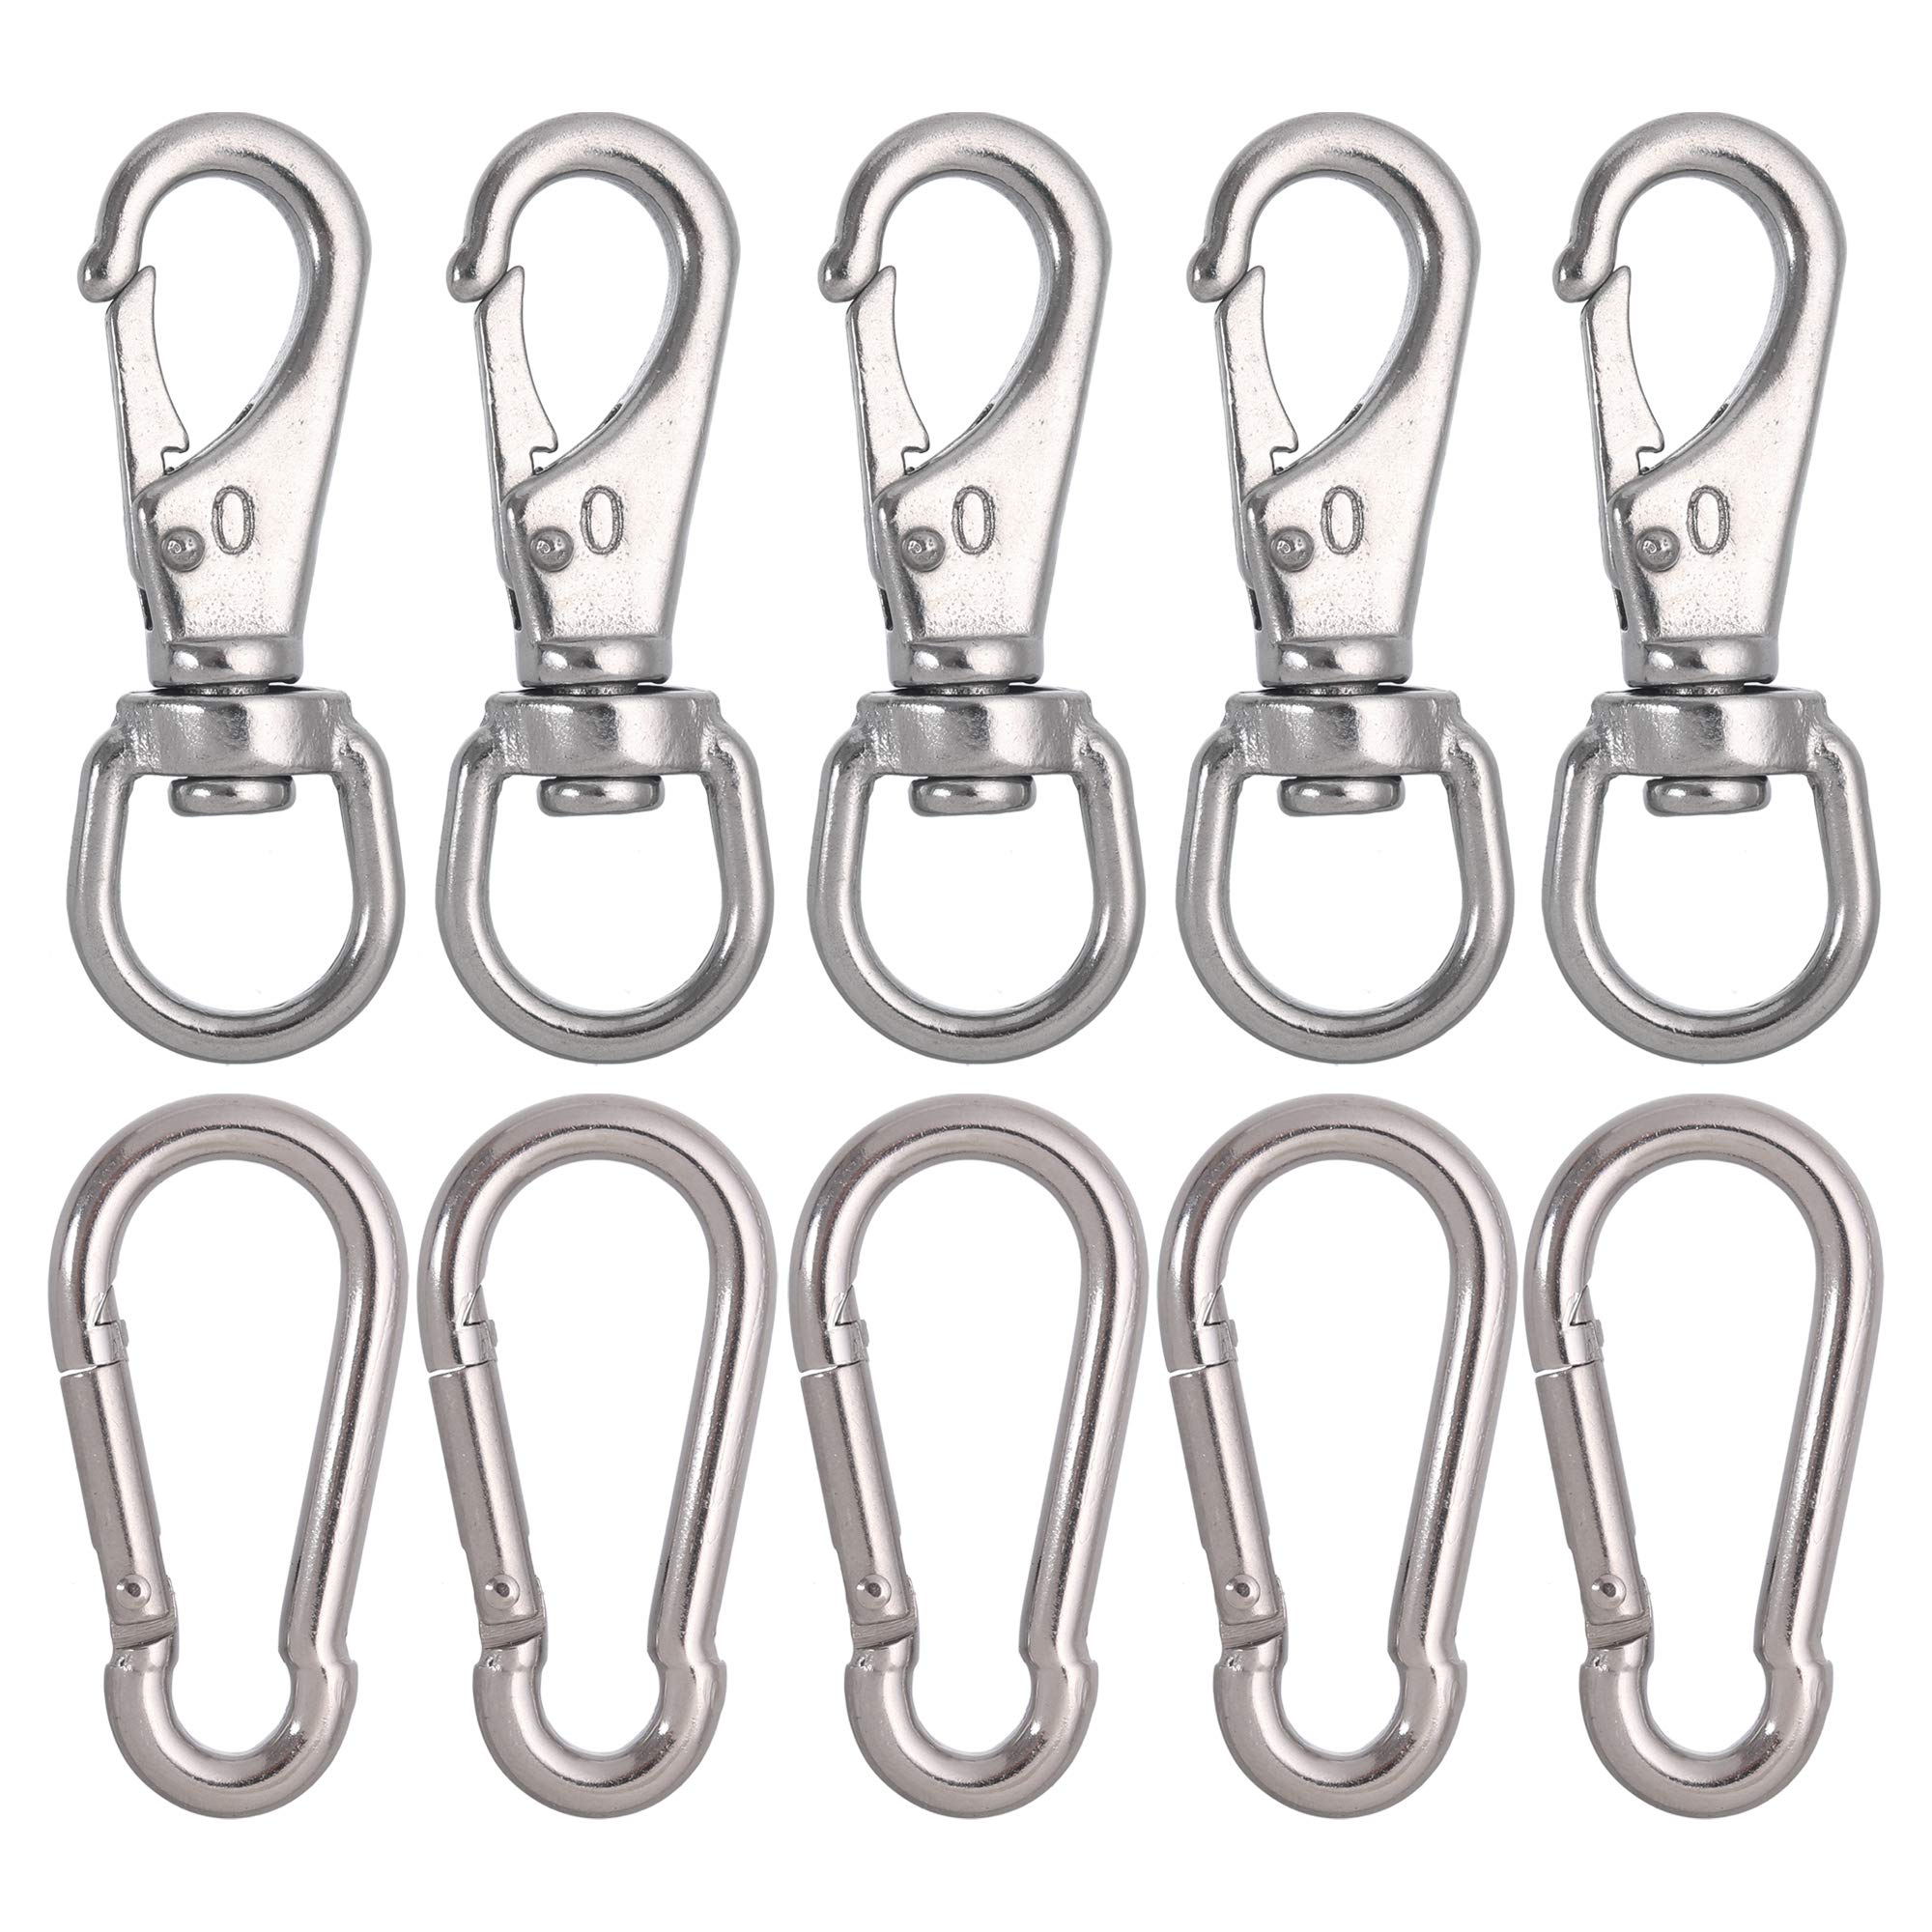 Mixiflor 5pcs Stainless Steel Swivel Eye Snap Hook Flag Pole Clips,with  5pcs Snap Hook Carabiner Diving Clips Spring Hooks for Bird Feeders, Pet  Chains, Dog Tie-Out Cable, Keychains and More